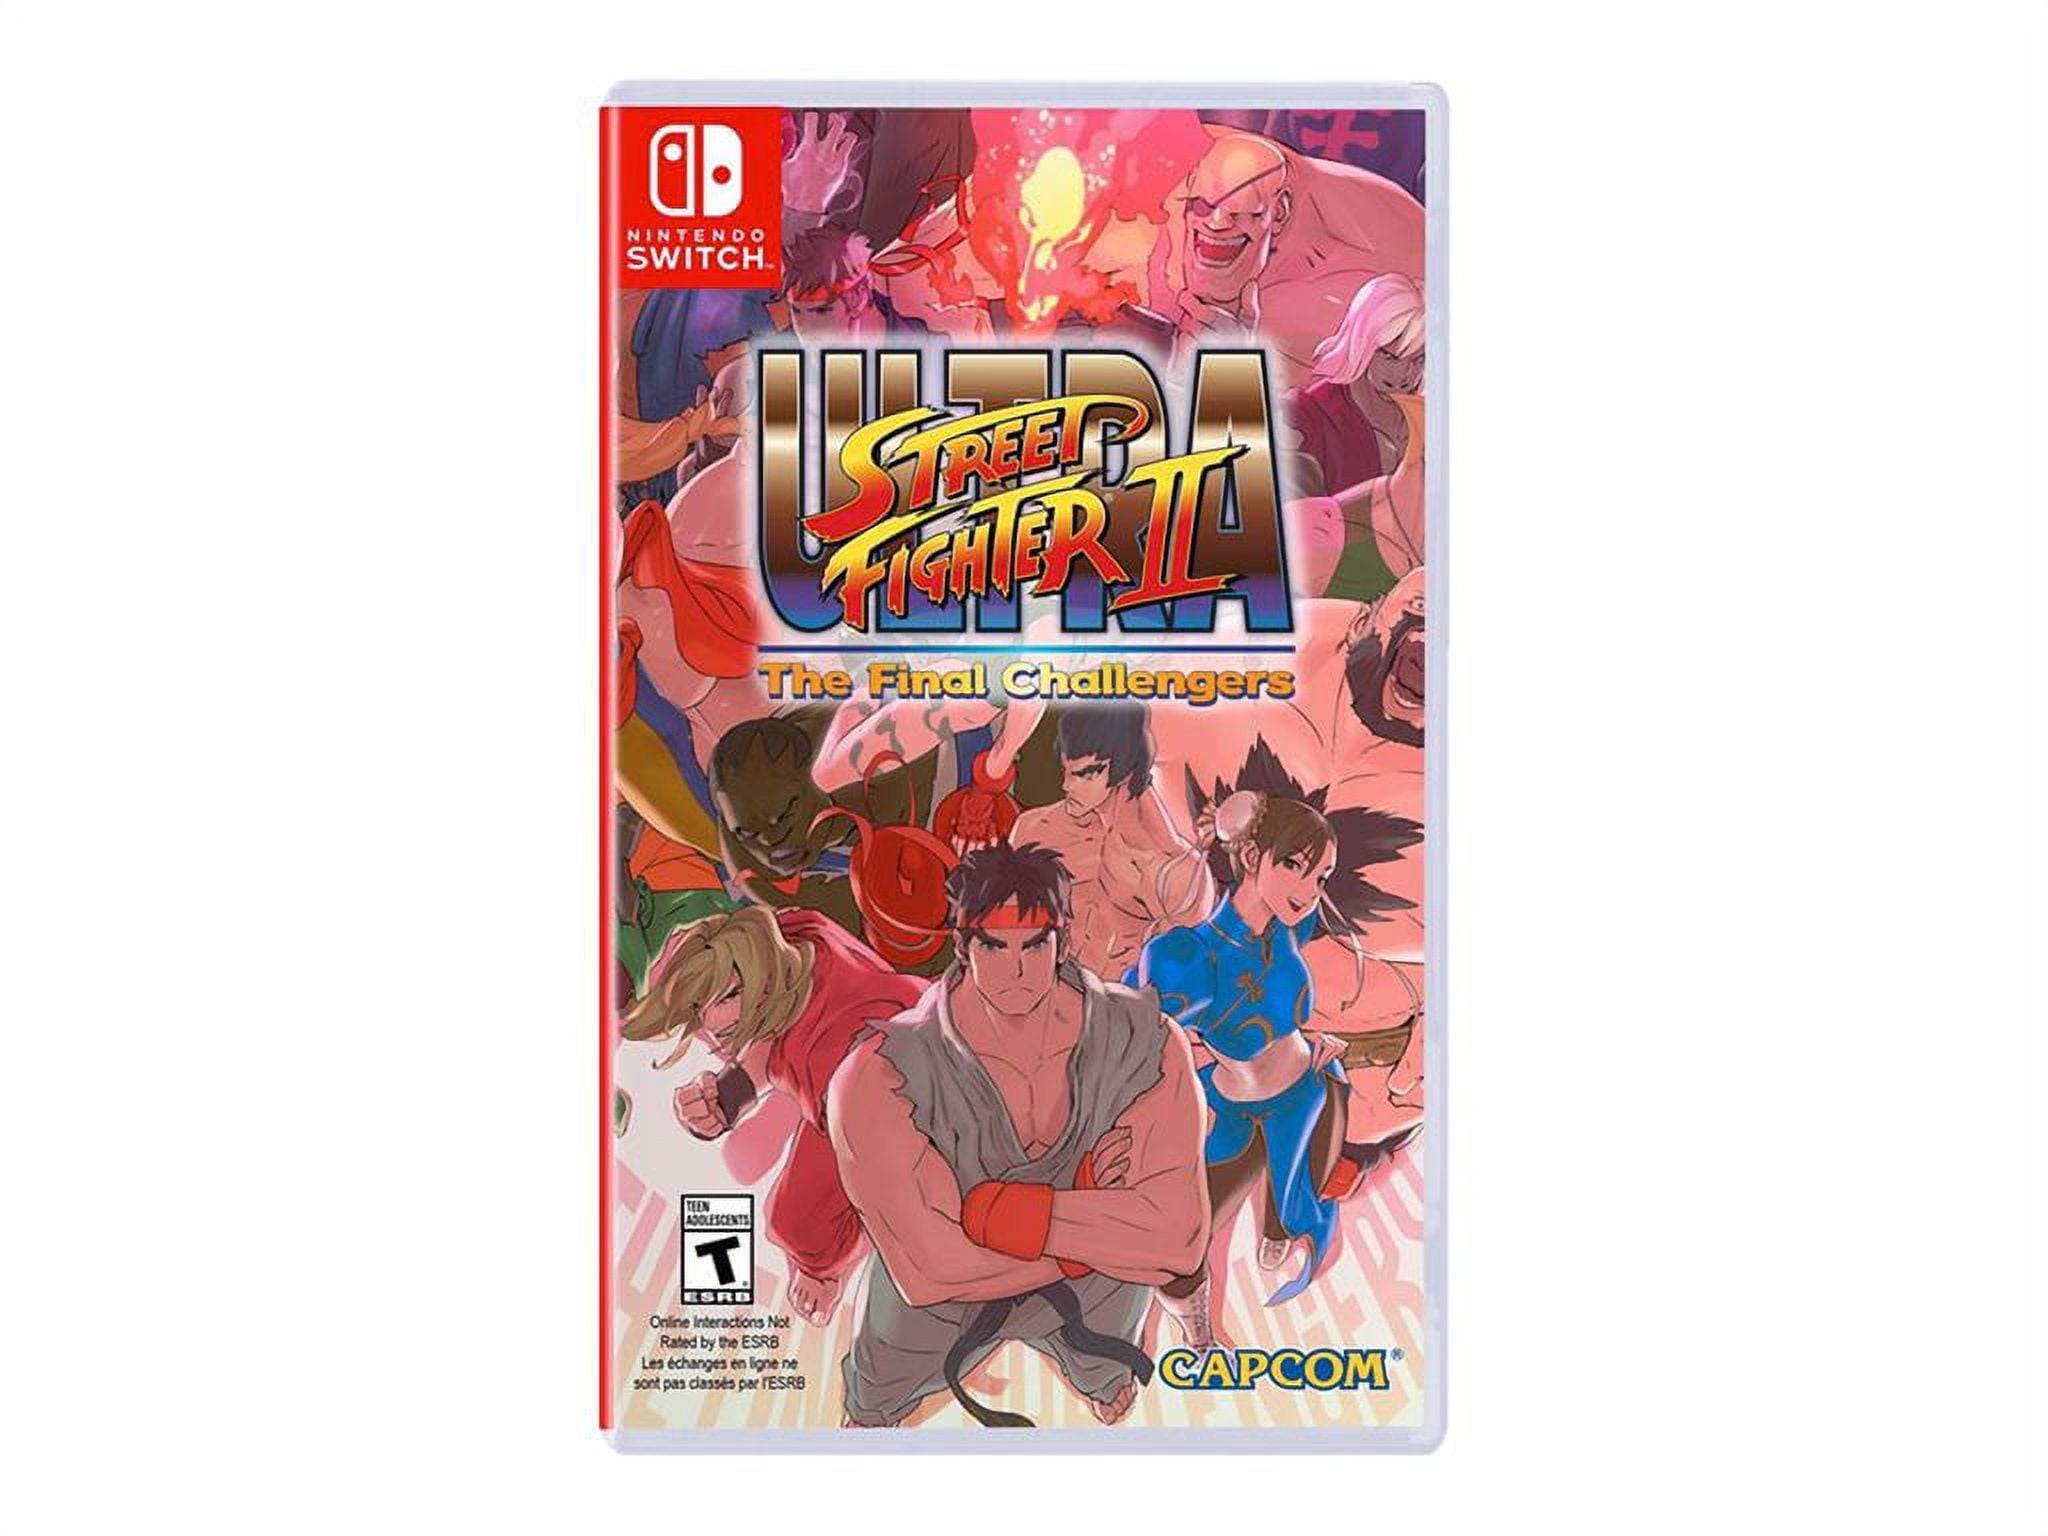 Ultra Street Fighter 2 on Nintendo Switch costs £35